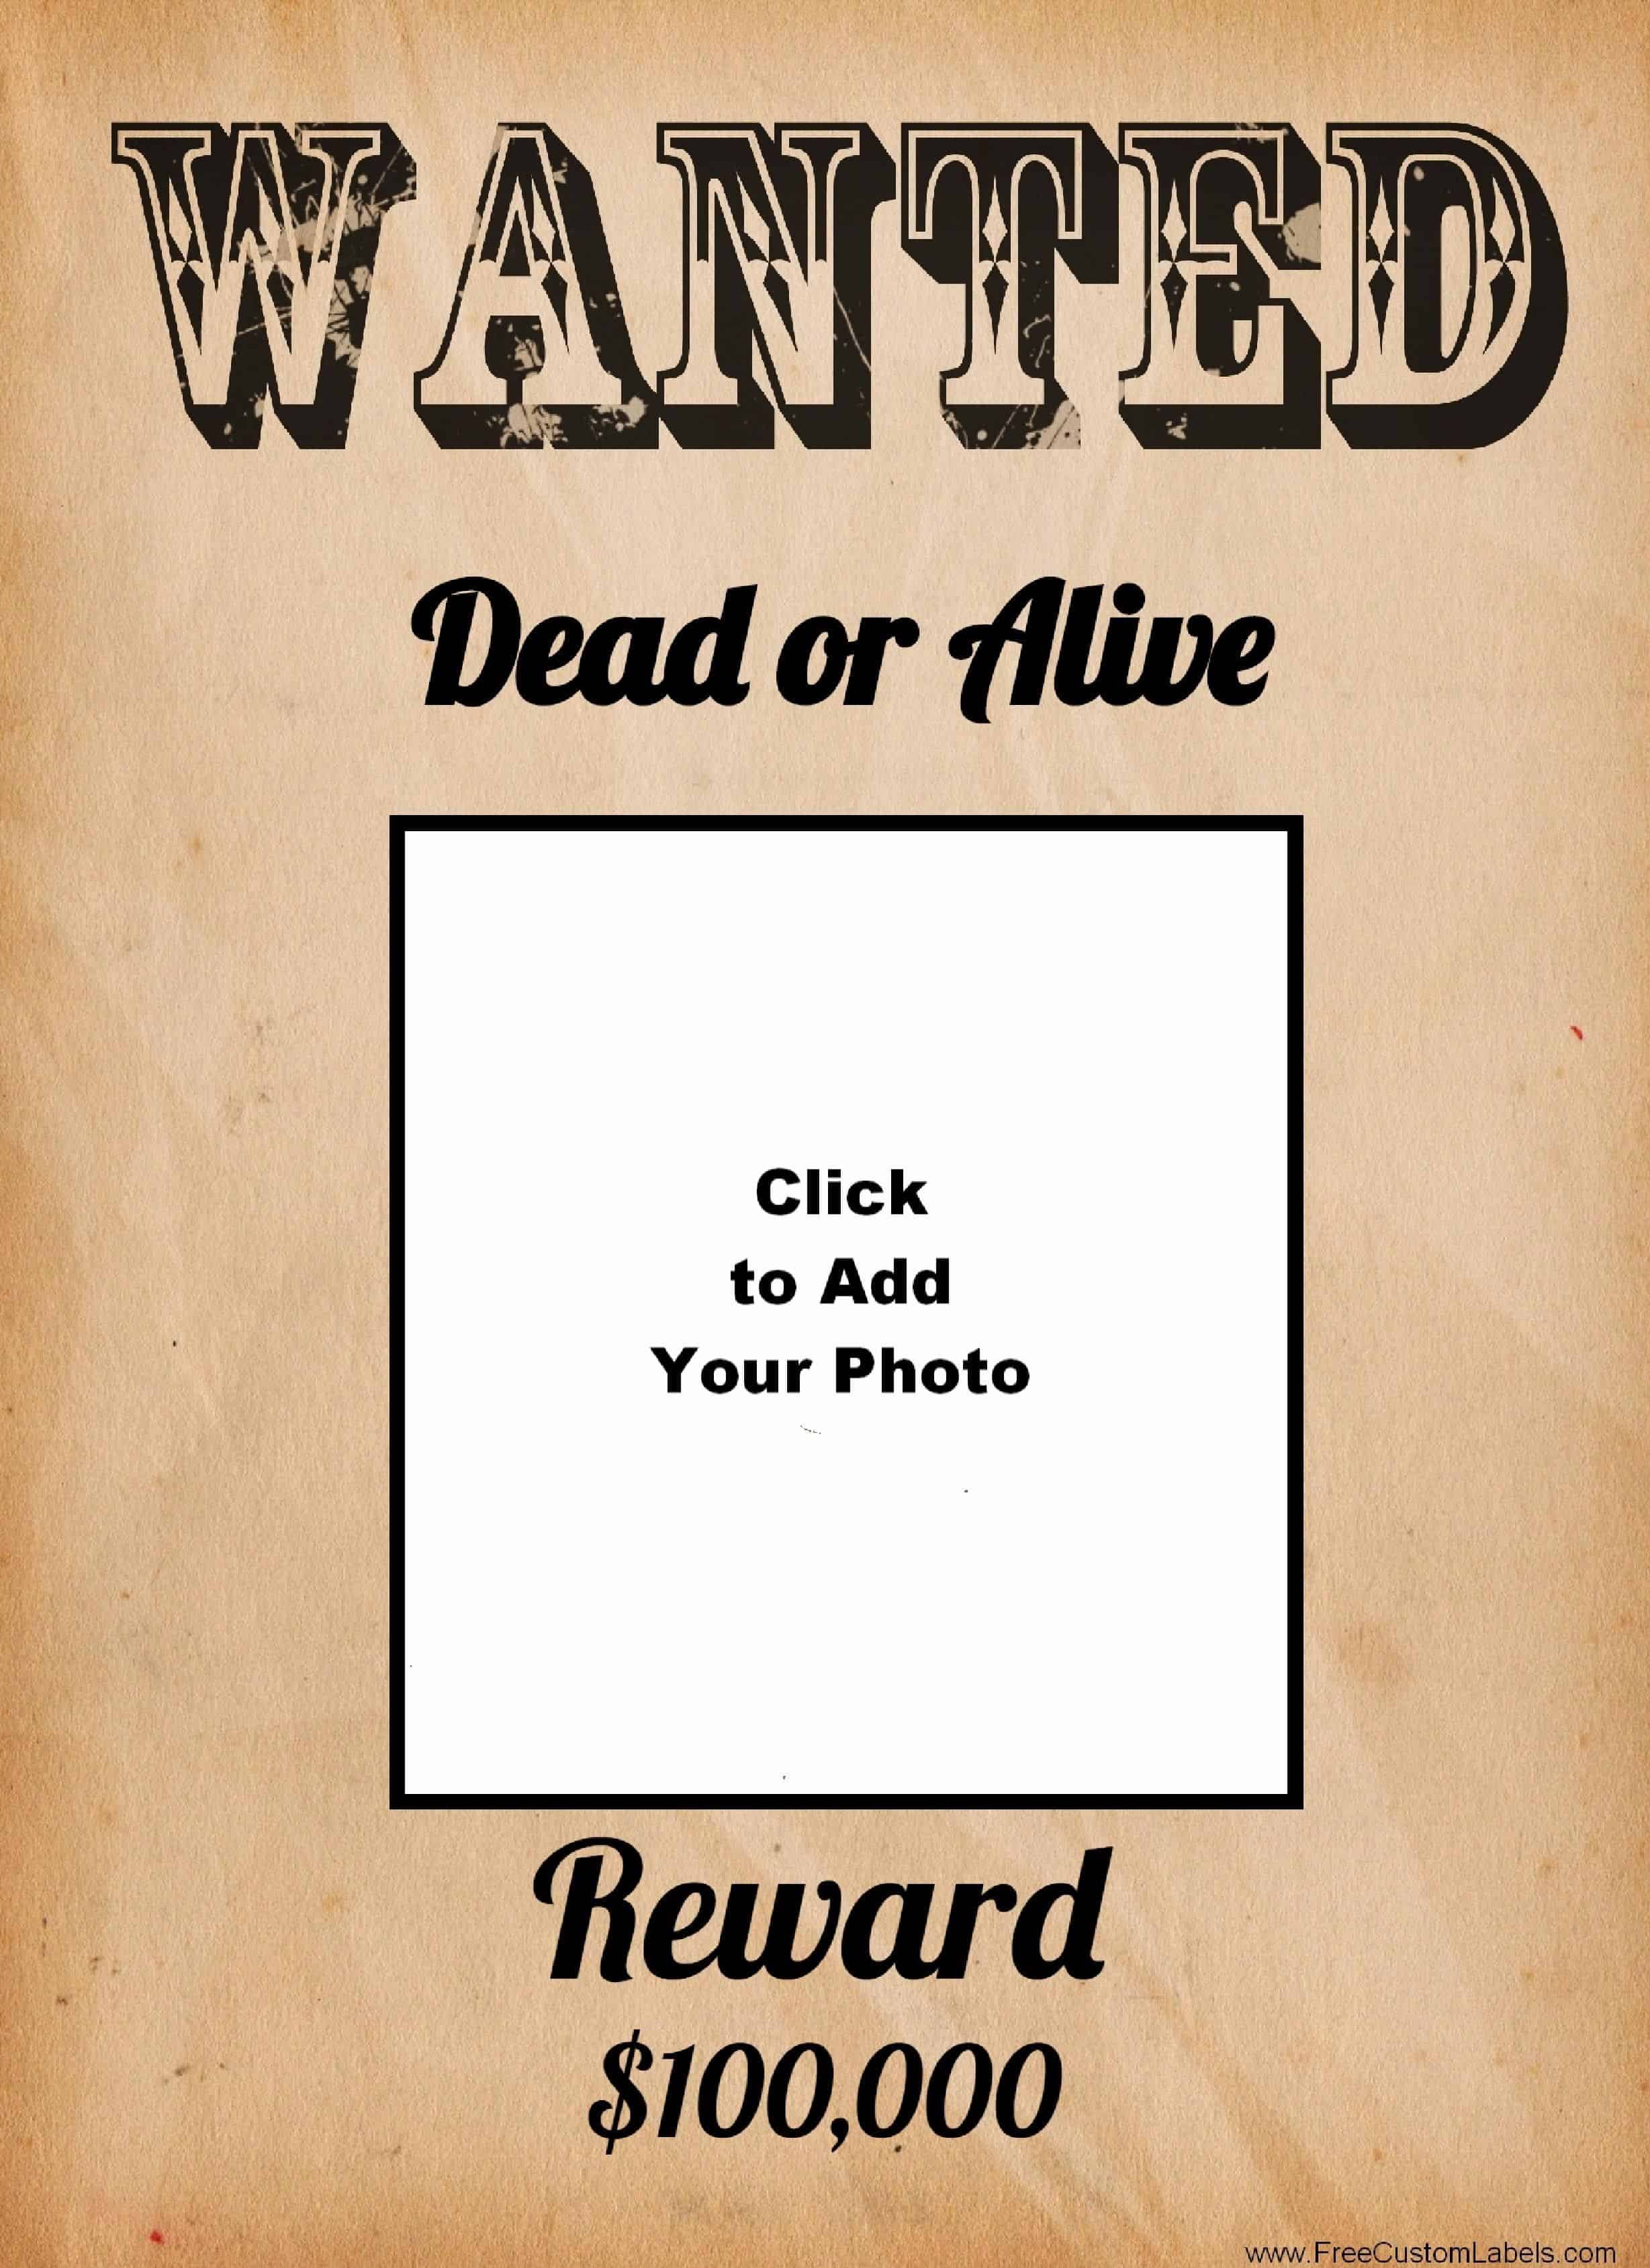 free-wanted-poster-maker-make-a-free-printable-wanted-poster-online